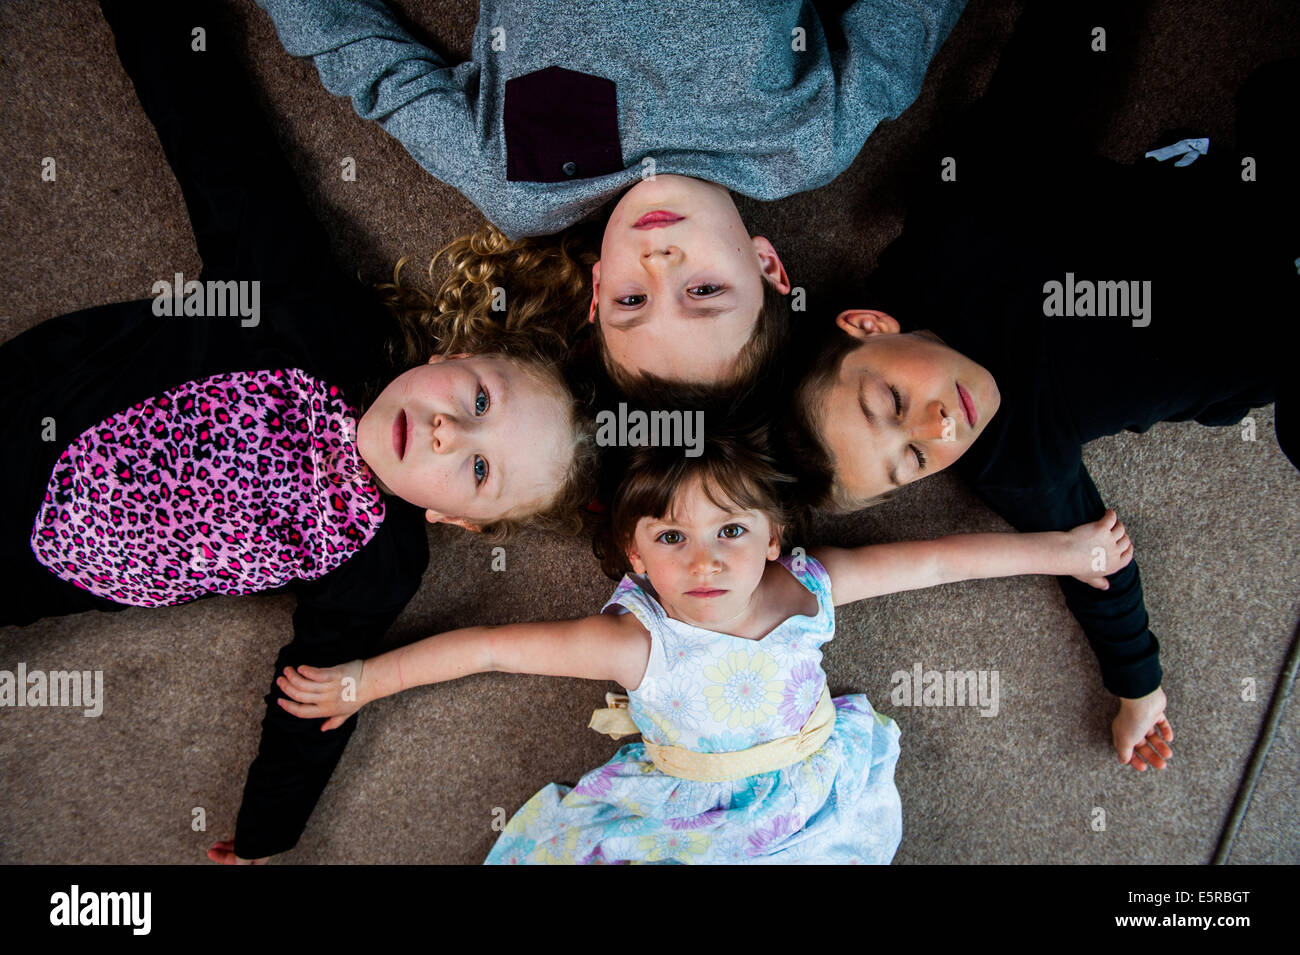 2 girls and 2 boys lying on floor shot from above Stock Photo